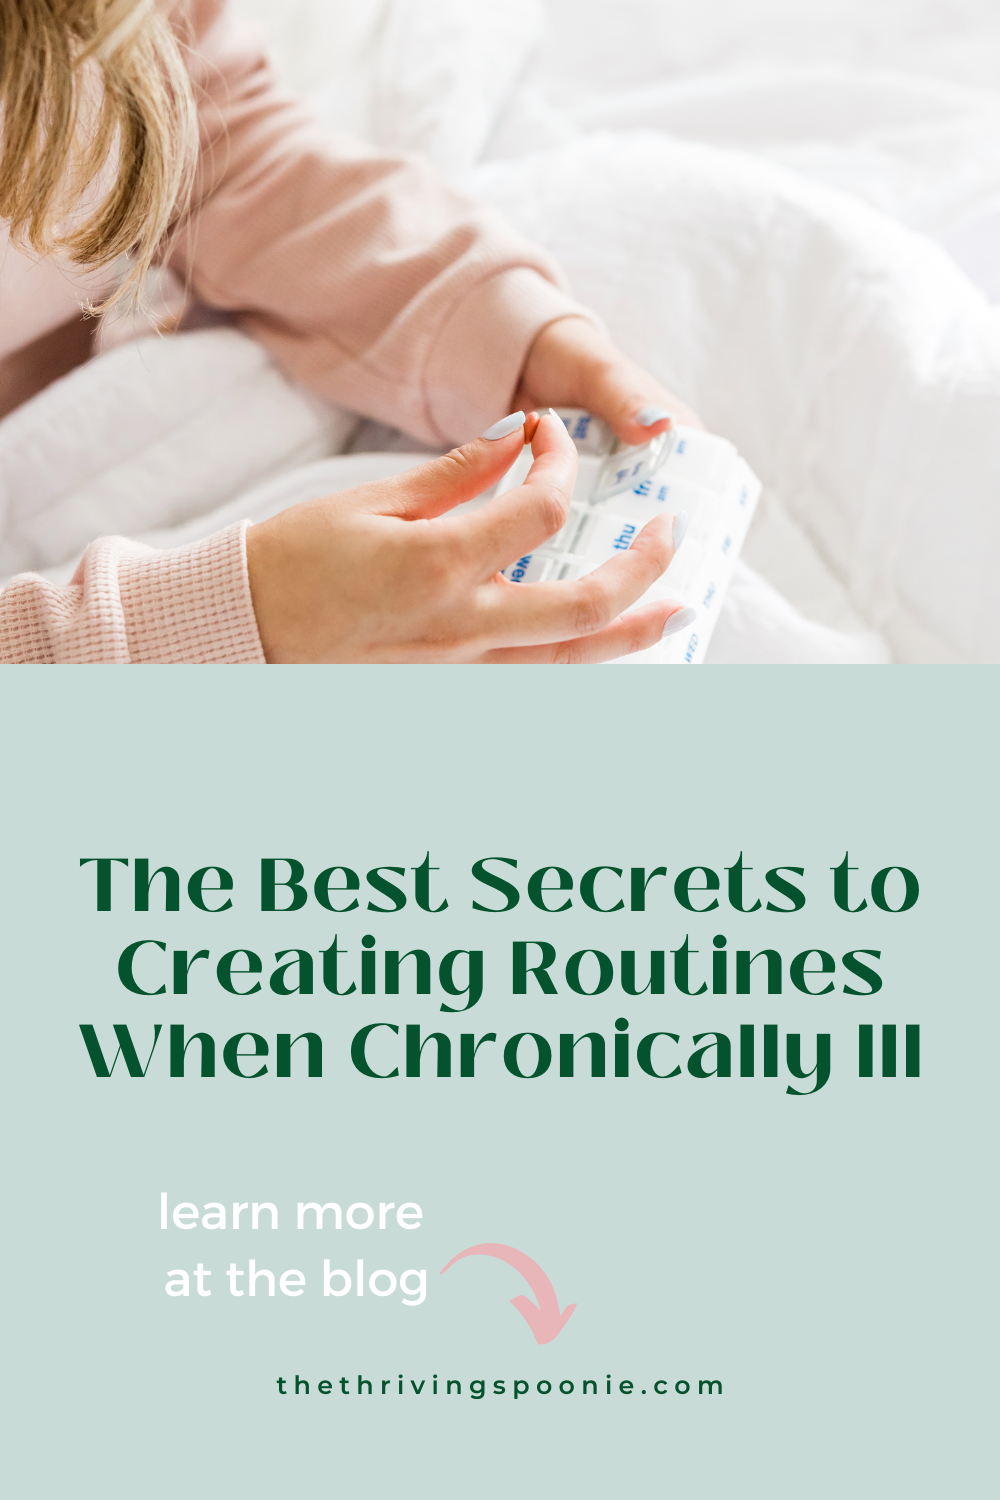 Routines give us a cushion to fall back on when our flare-ups cause things not to go as planned, and they can also give us a supportive framework to help maintain our wellness to the best of our ability. Head to the blog to learn the best secrets to creating routines when chronically ill, and how they can support you in thriving through chronic illness.